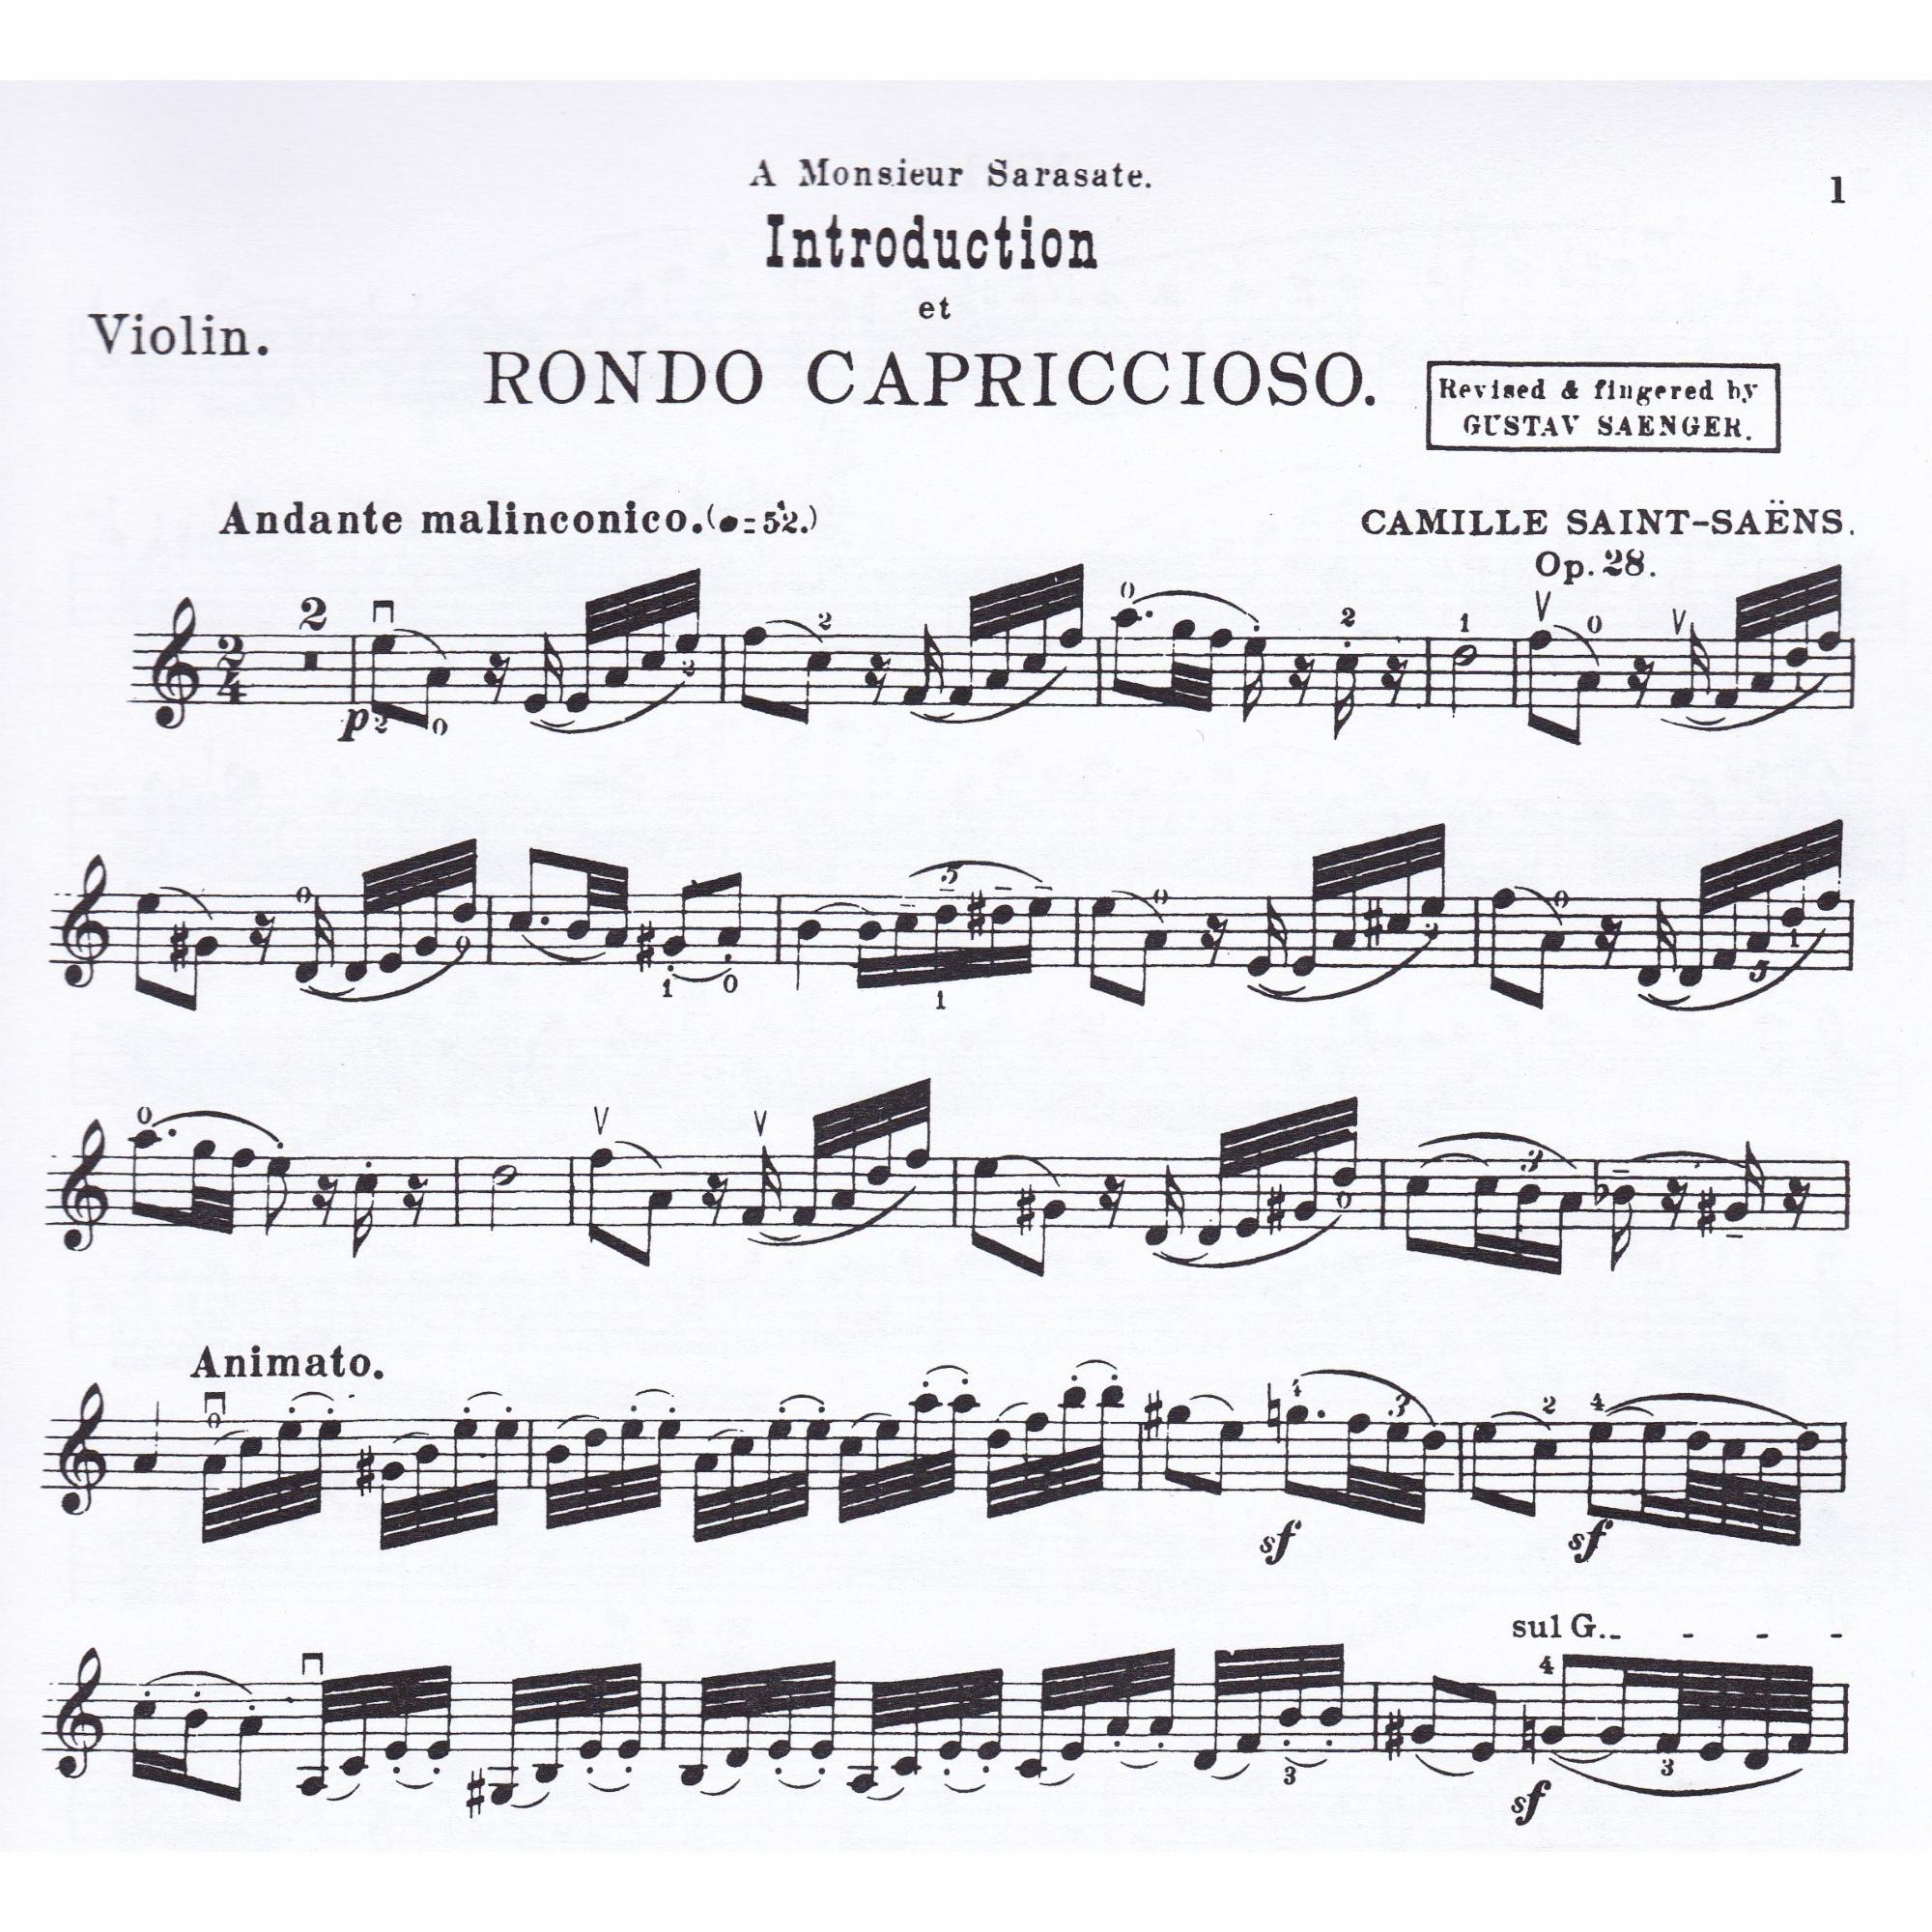 Introduction and Rondo Capriccioso for Violin and Piano, Op. 28